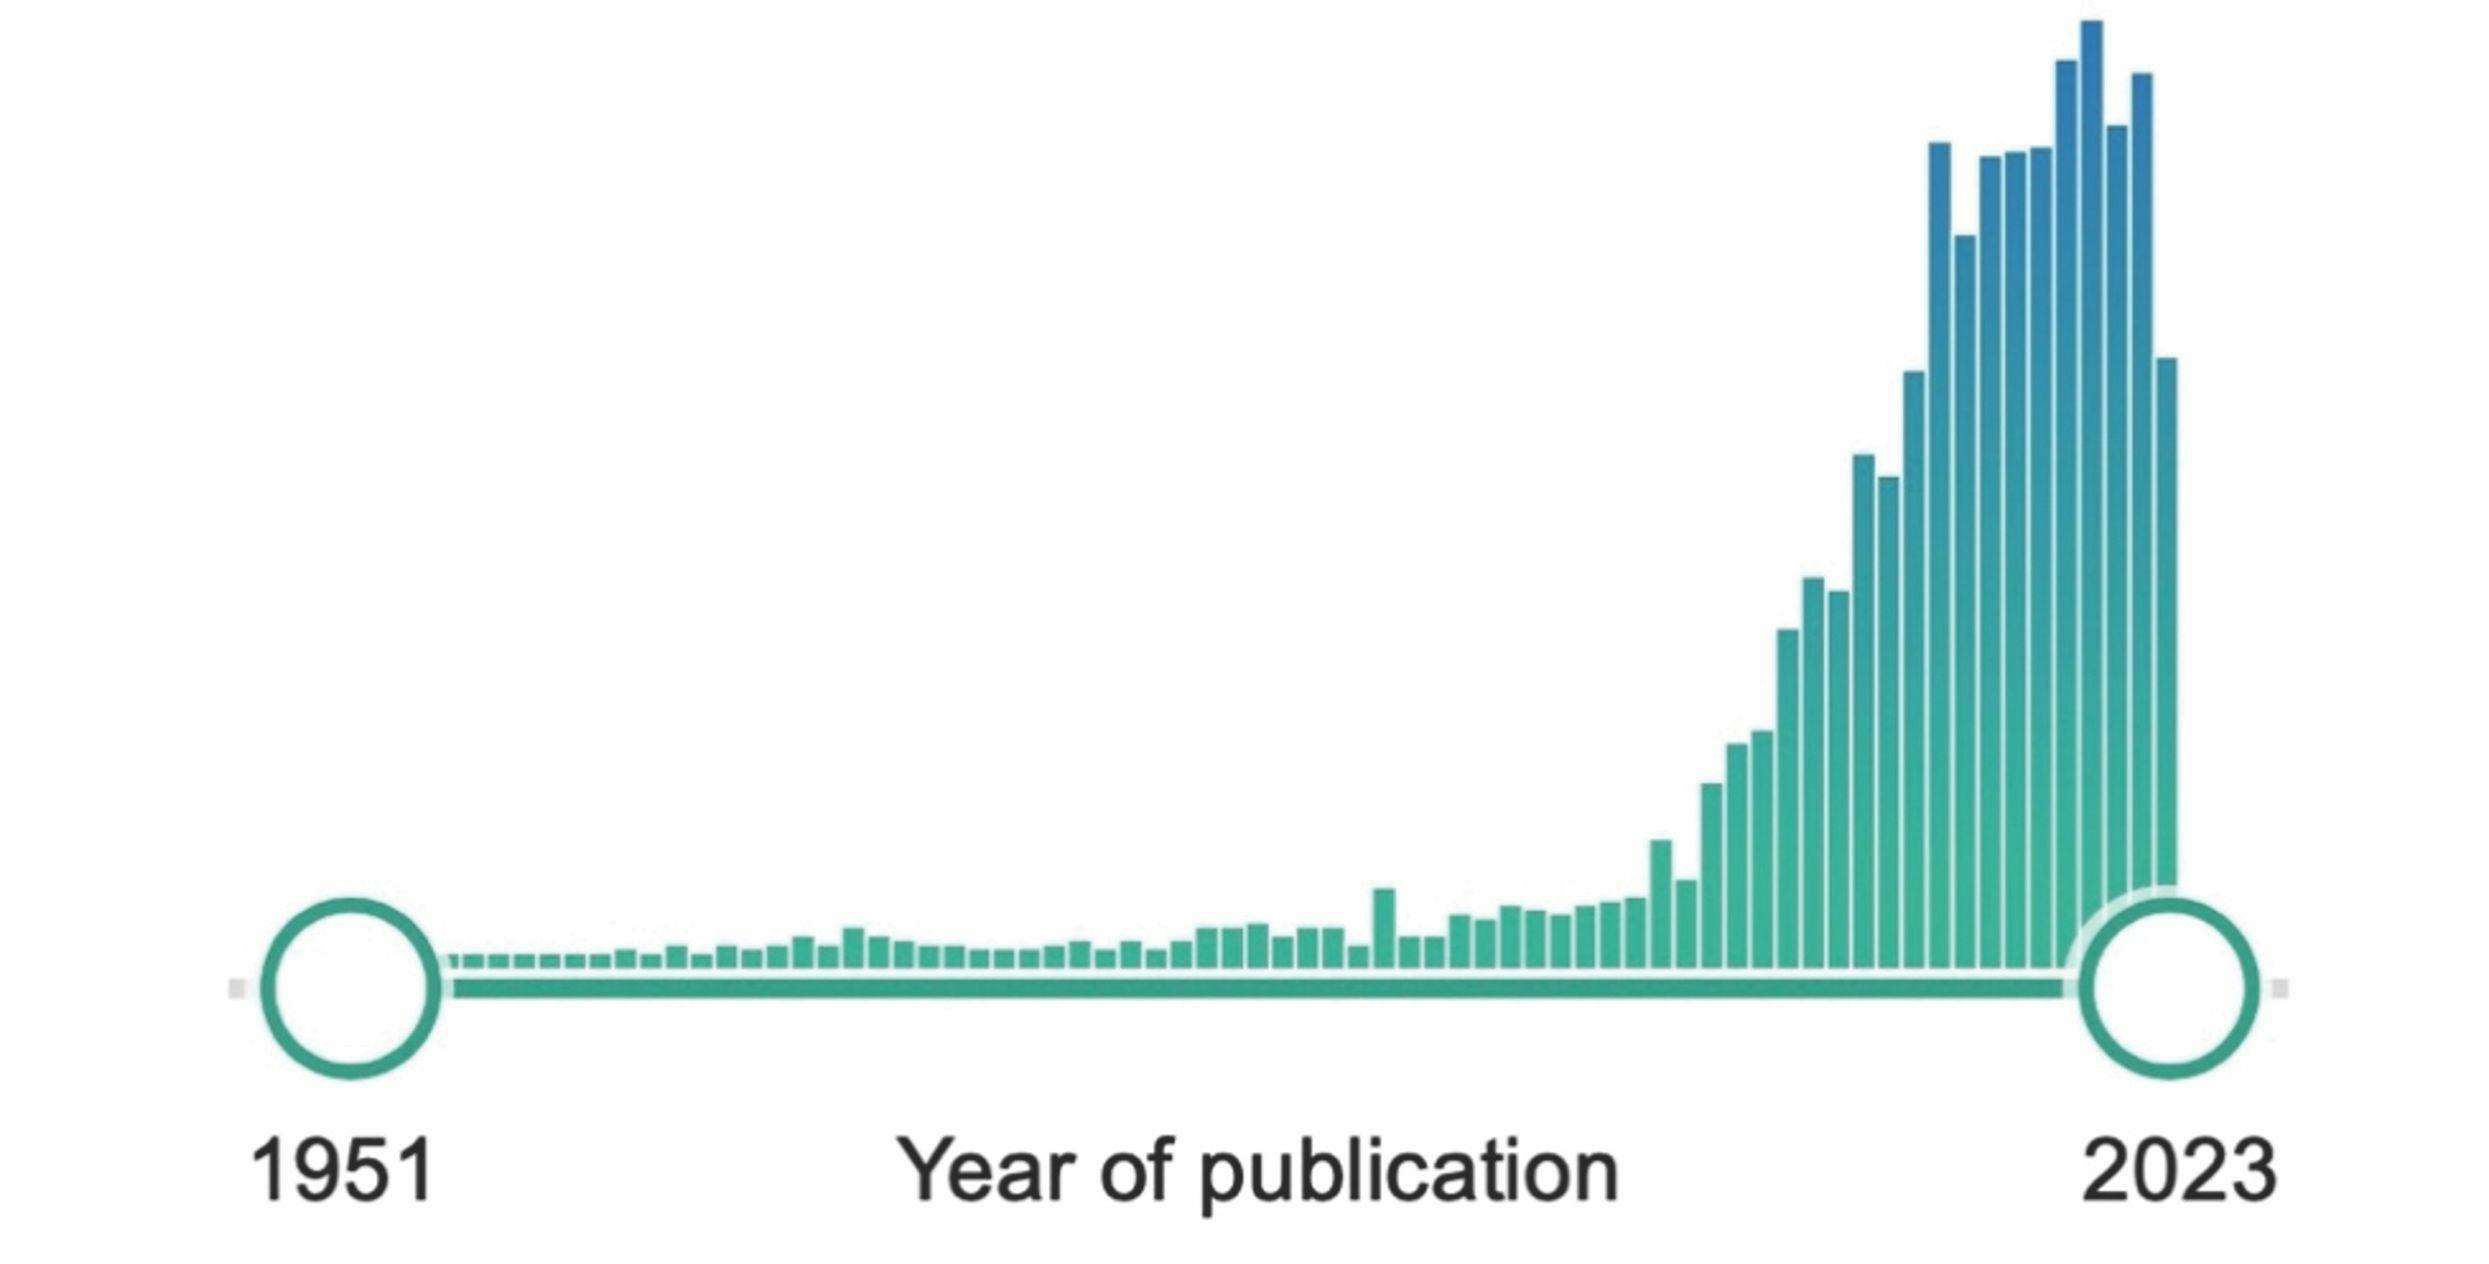 Figure 1. Histogram plot showing the total number of publications on corneal biomechanics indexed on PubMed from 1951 to 2023.